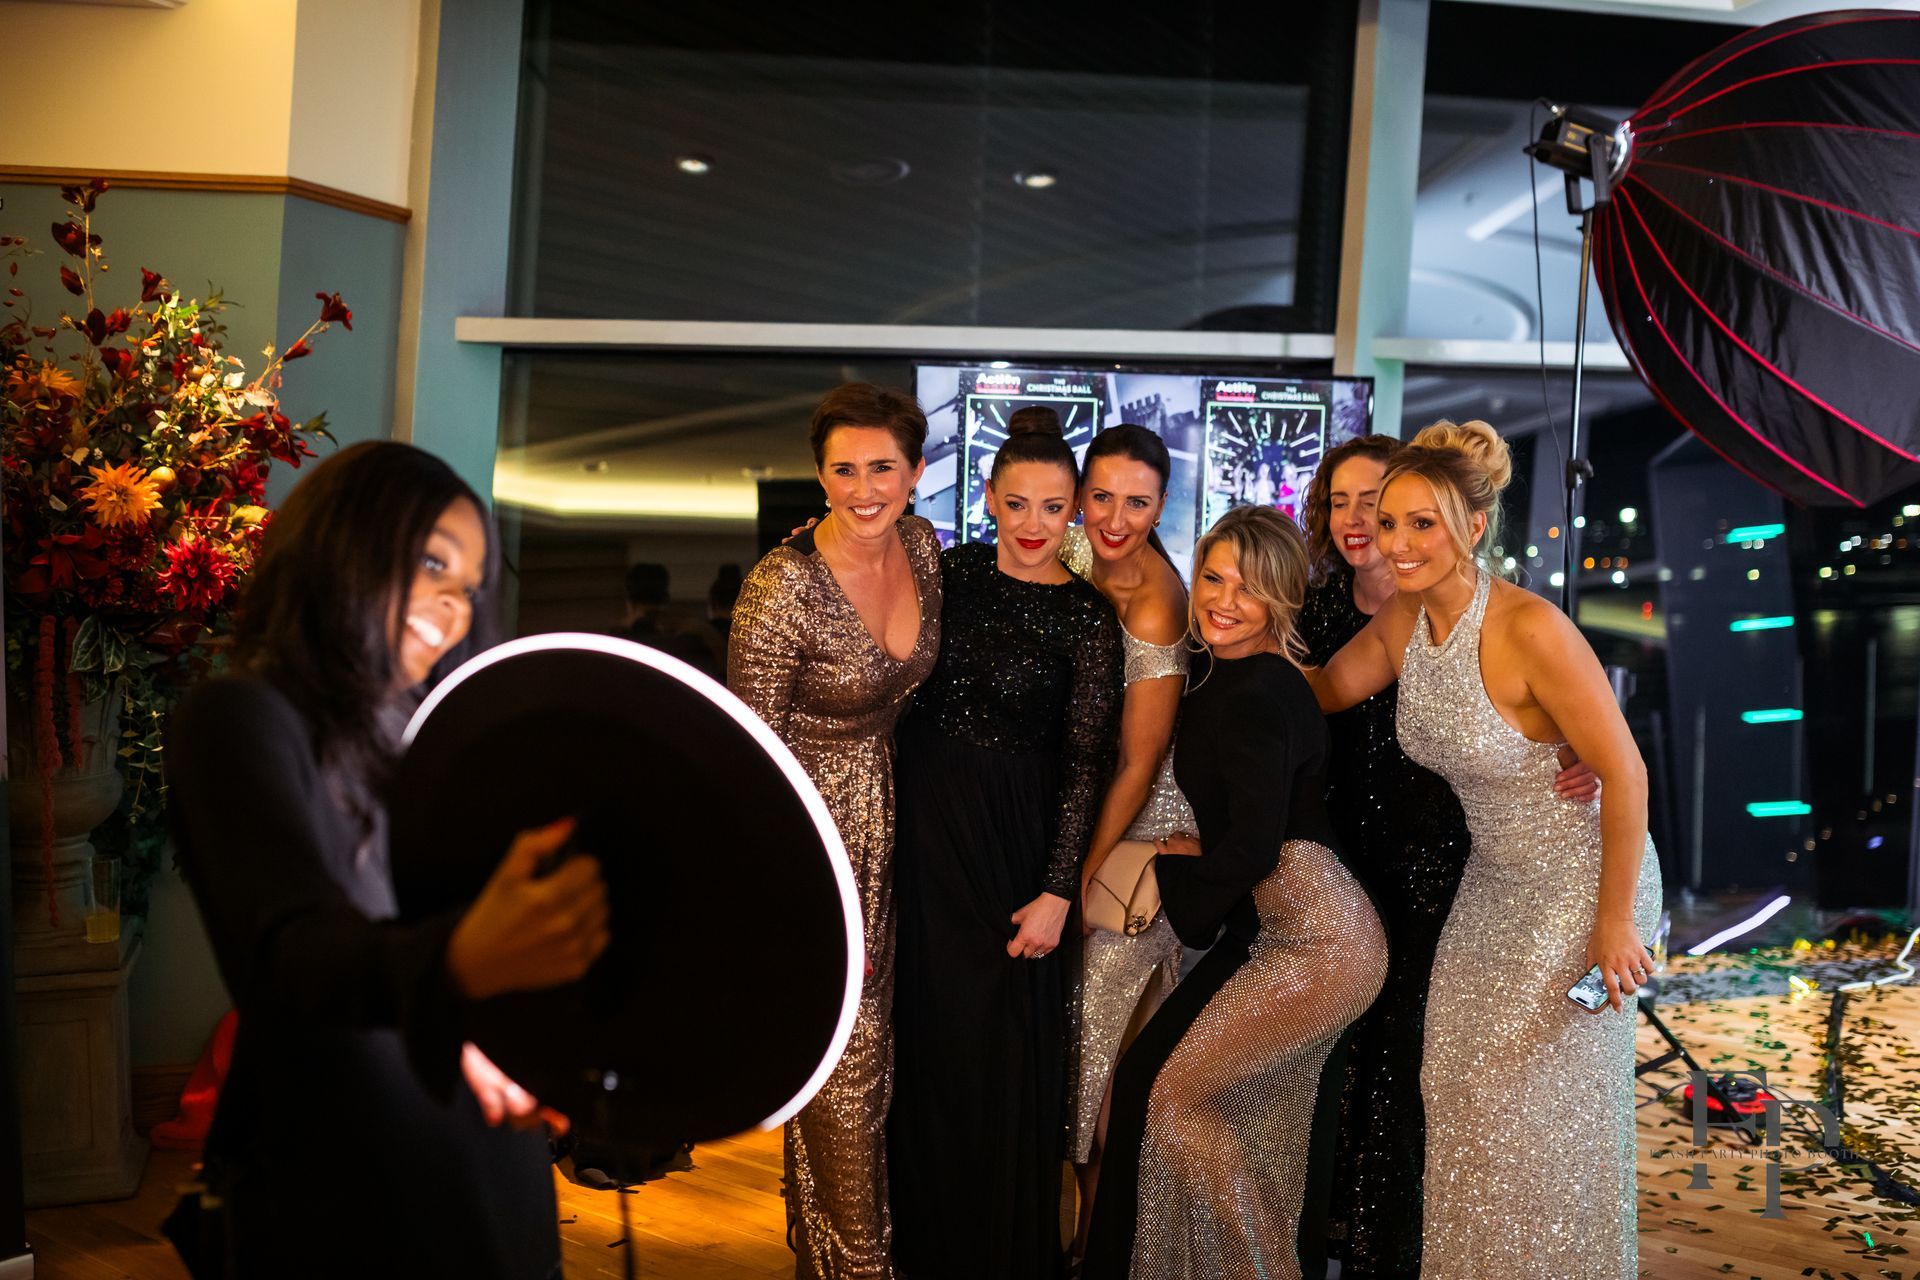 Corporate event guests showing confidence and sophistication in our roamer photo booth in Dallas, Texas.